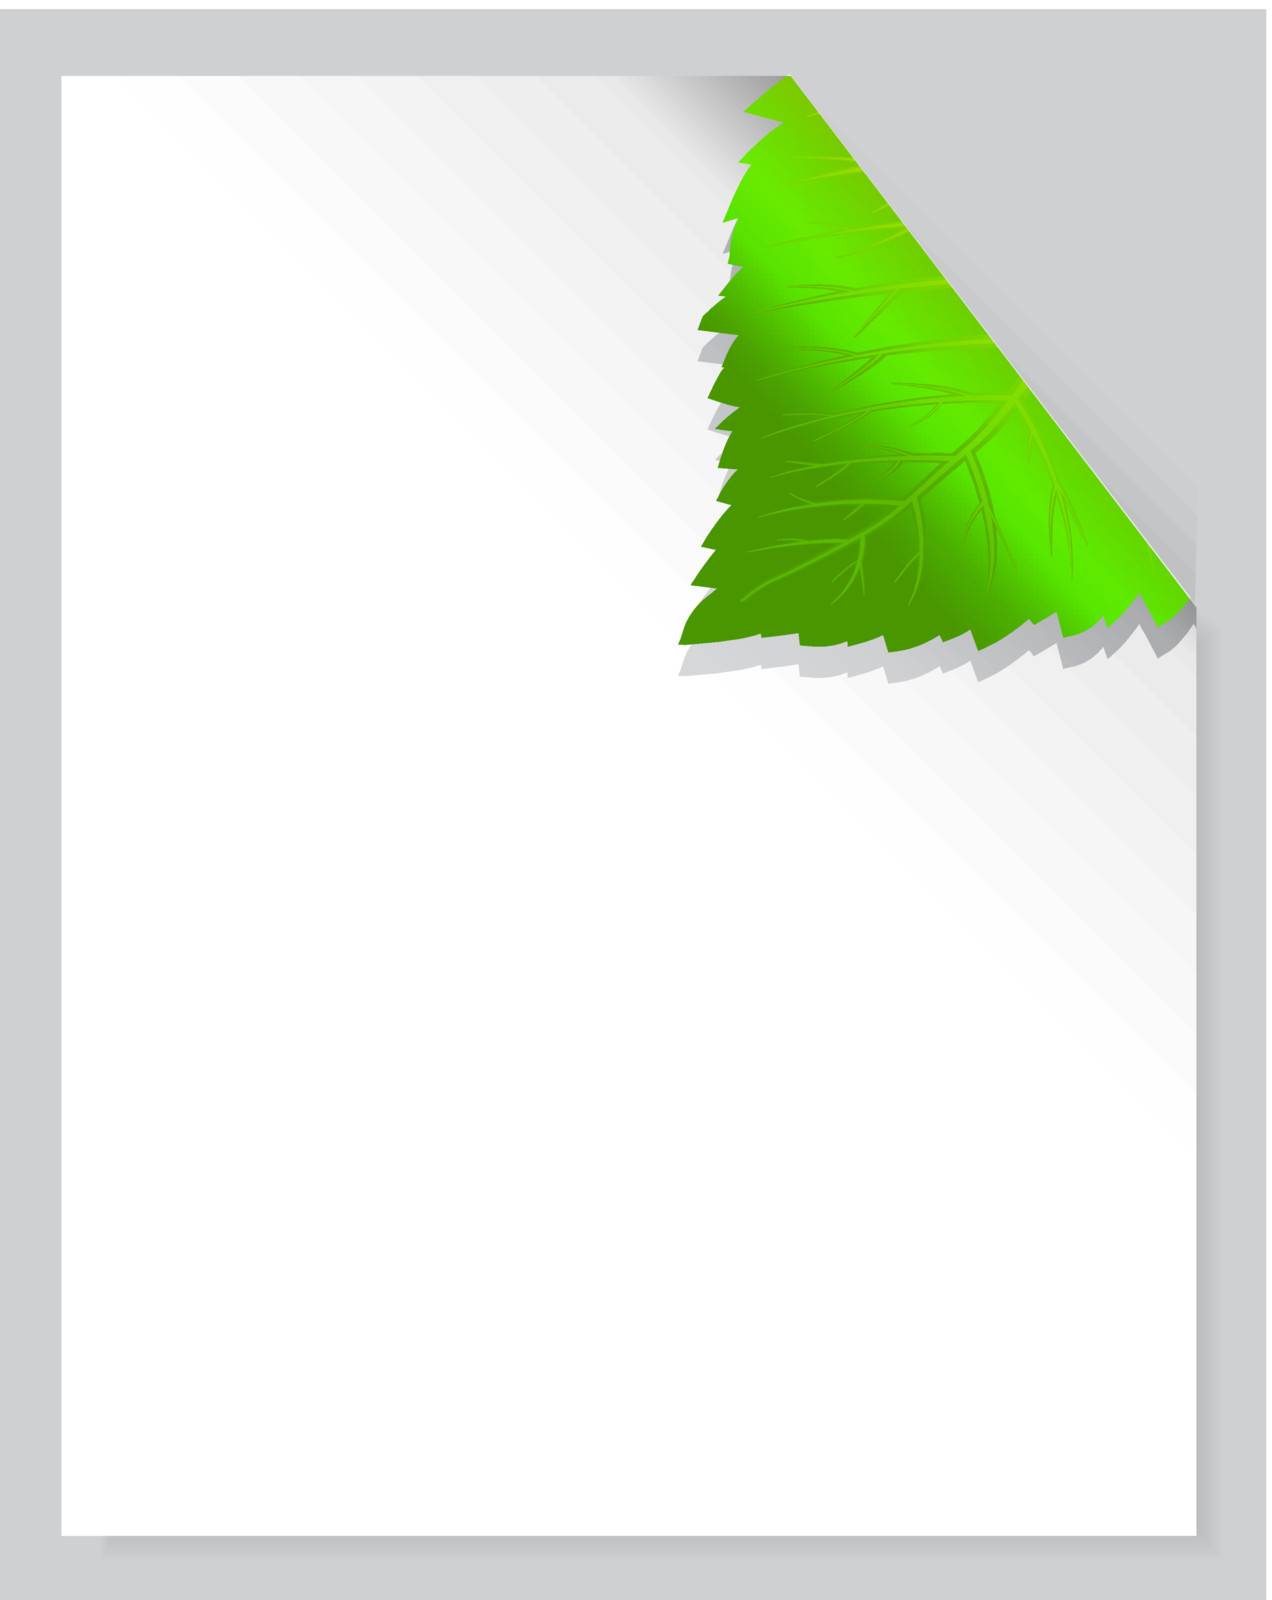 Leaf Page vector illustration on gray background with shadow